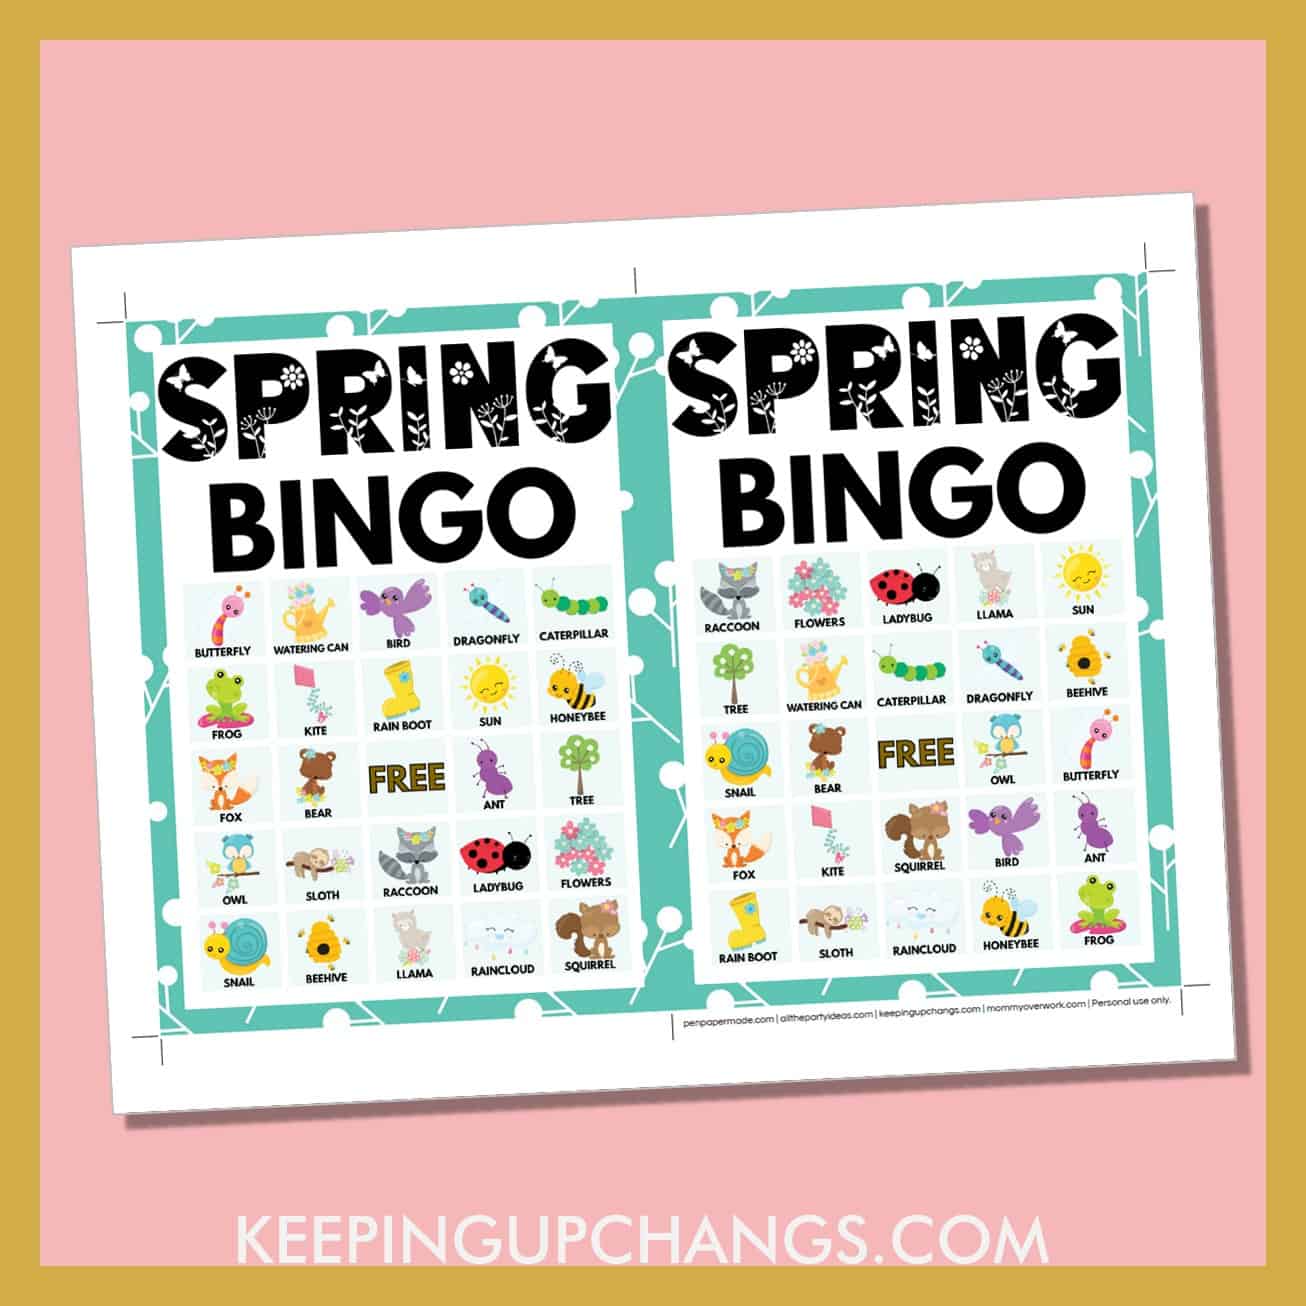 free spring bingo card 5x5 5x7 game boards with images and text words.